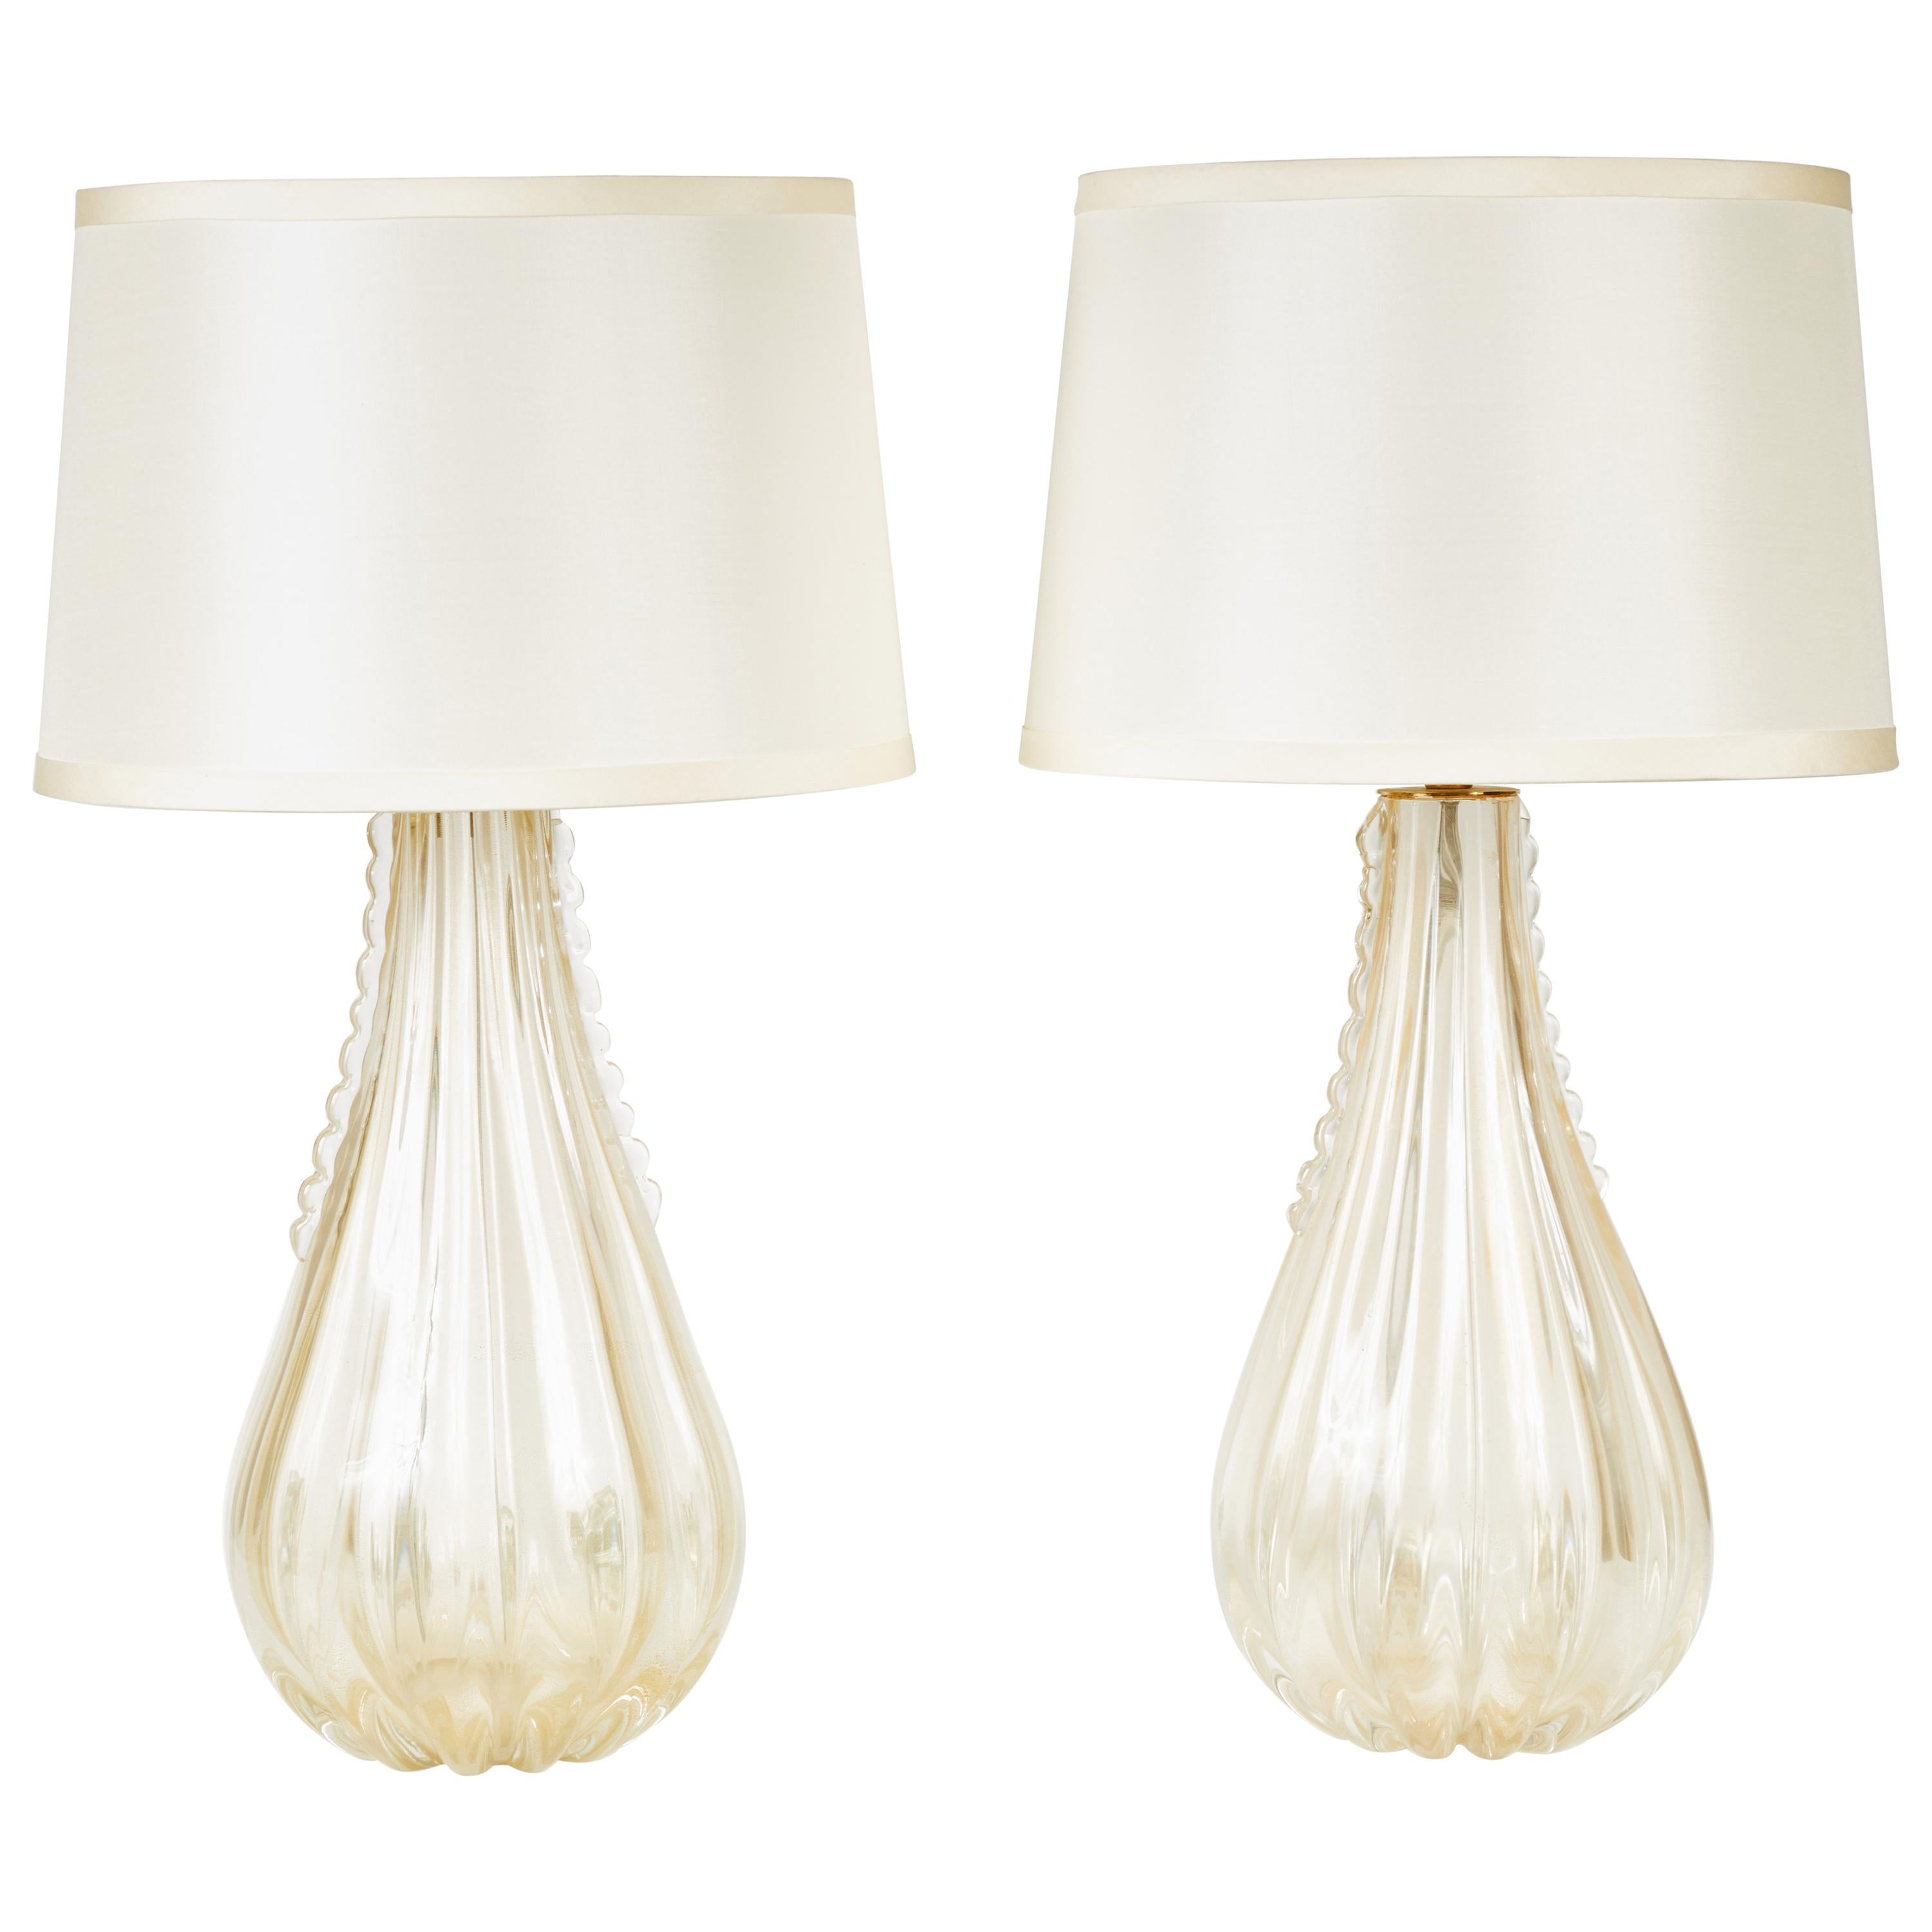 Pair of Gold Venetian Teardrop Lamps with Pongee Silk Shades